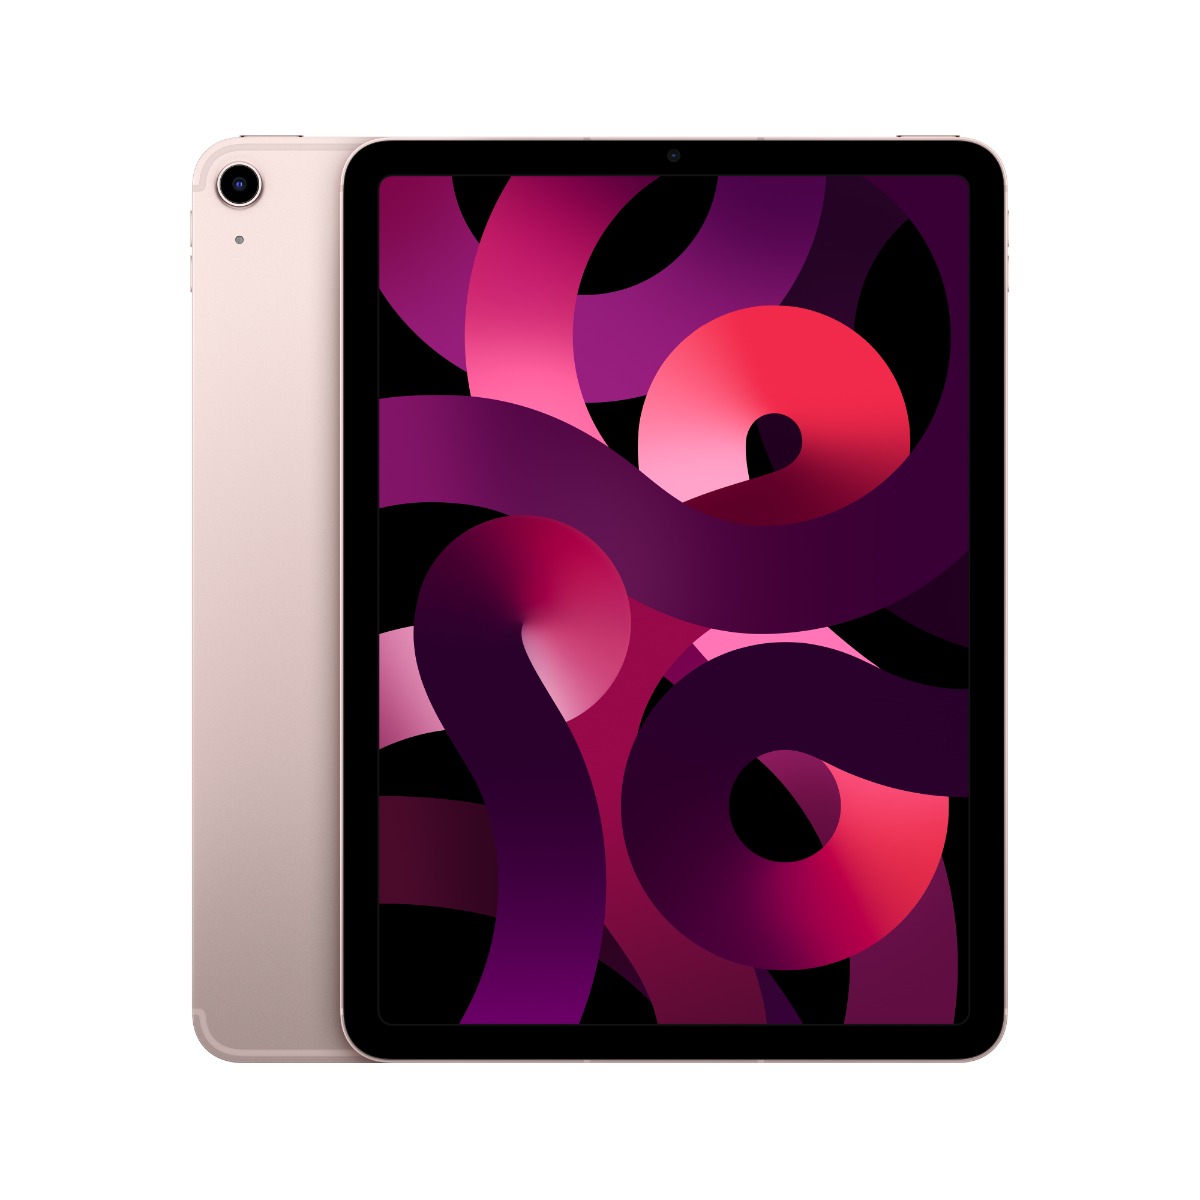 10.9-inch iPad Air (5th generation) Wi-Fi + Cellular, , large image number 1